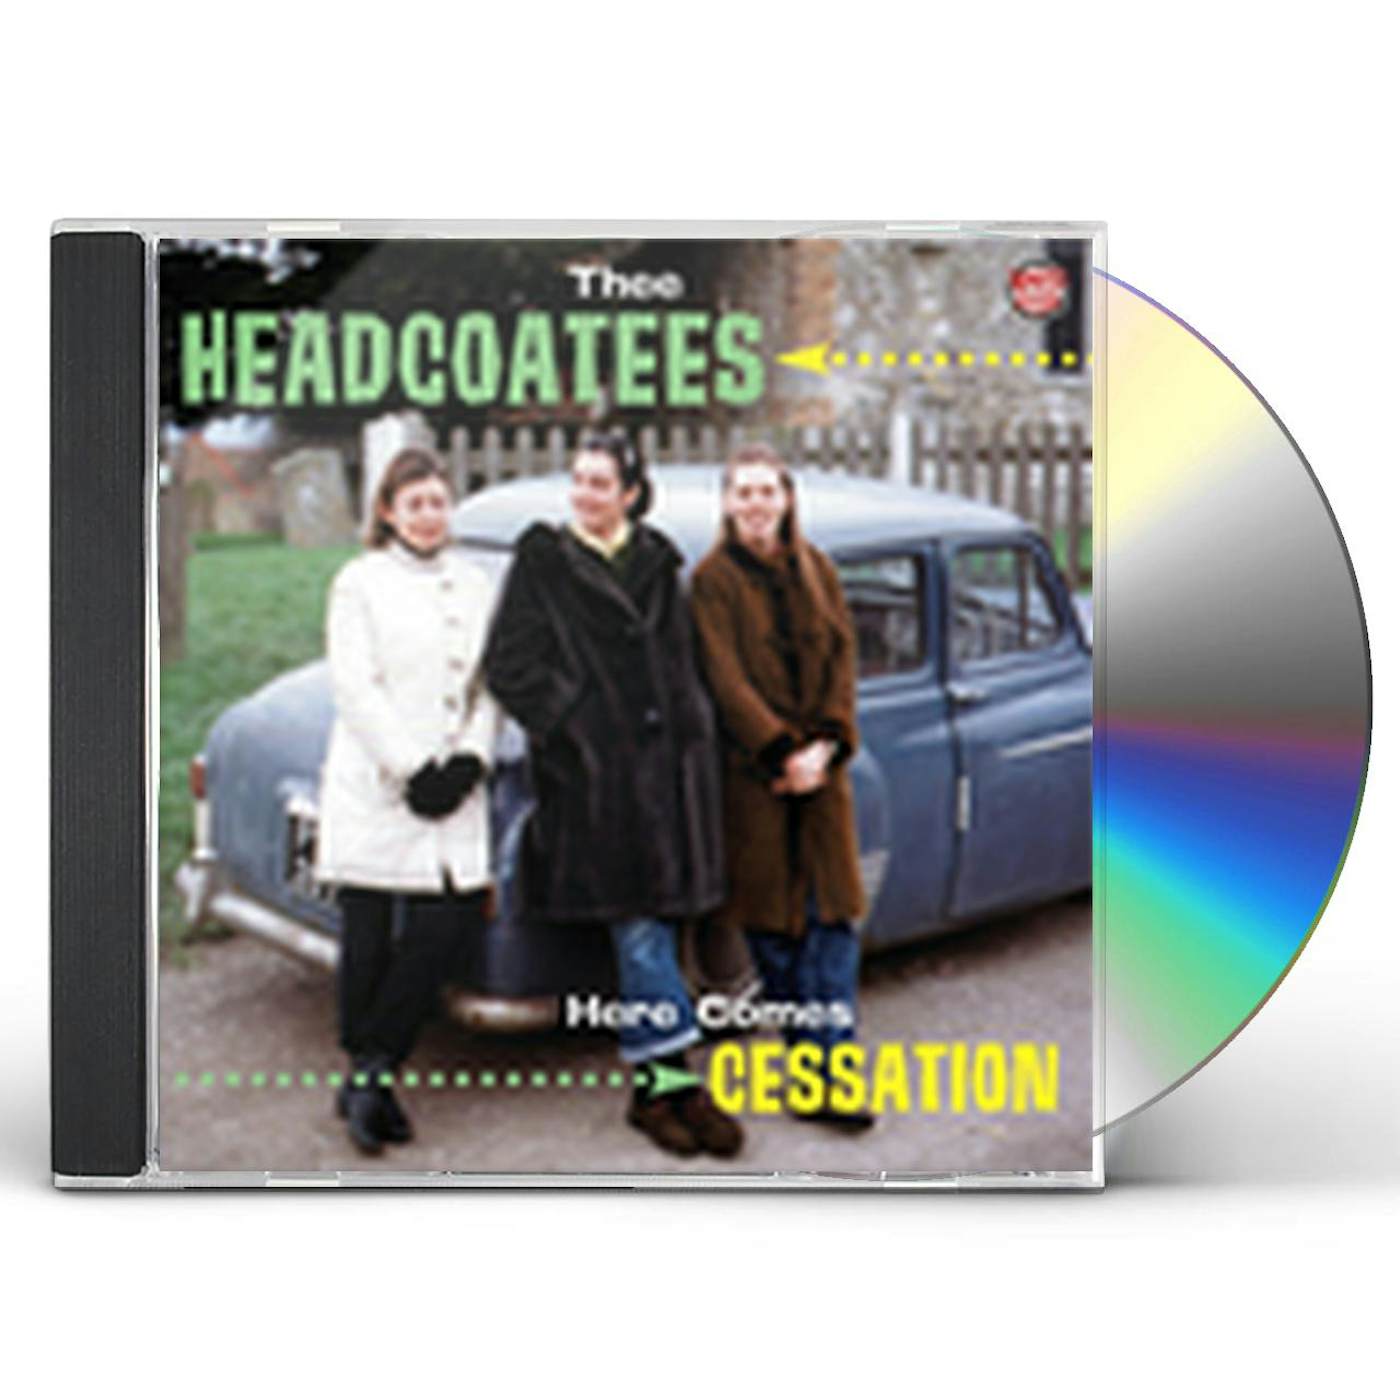 Thee Headcoatees HERE COMES CESSATION CD